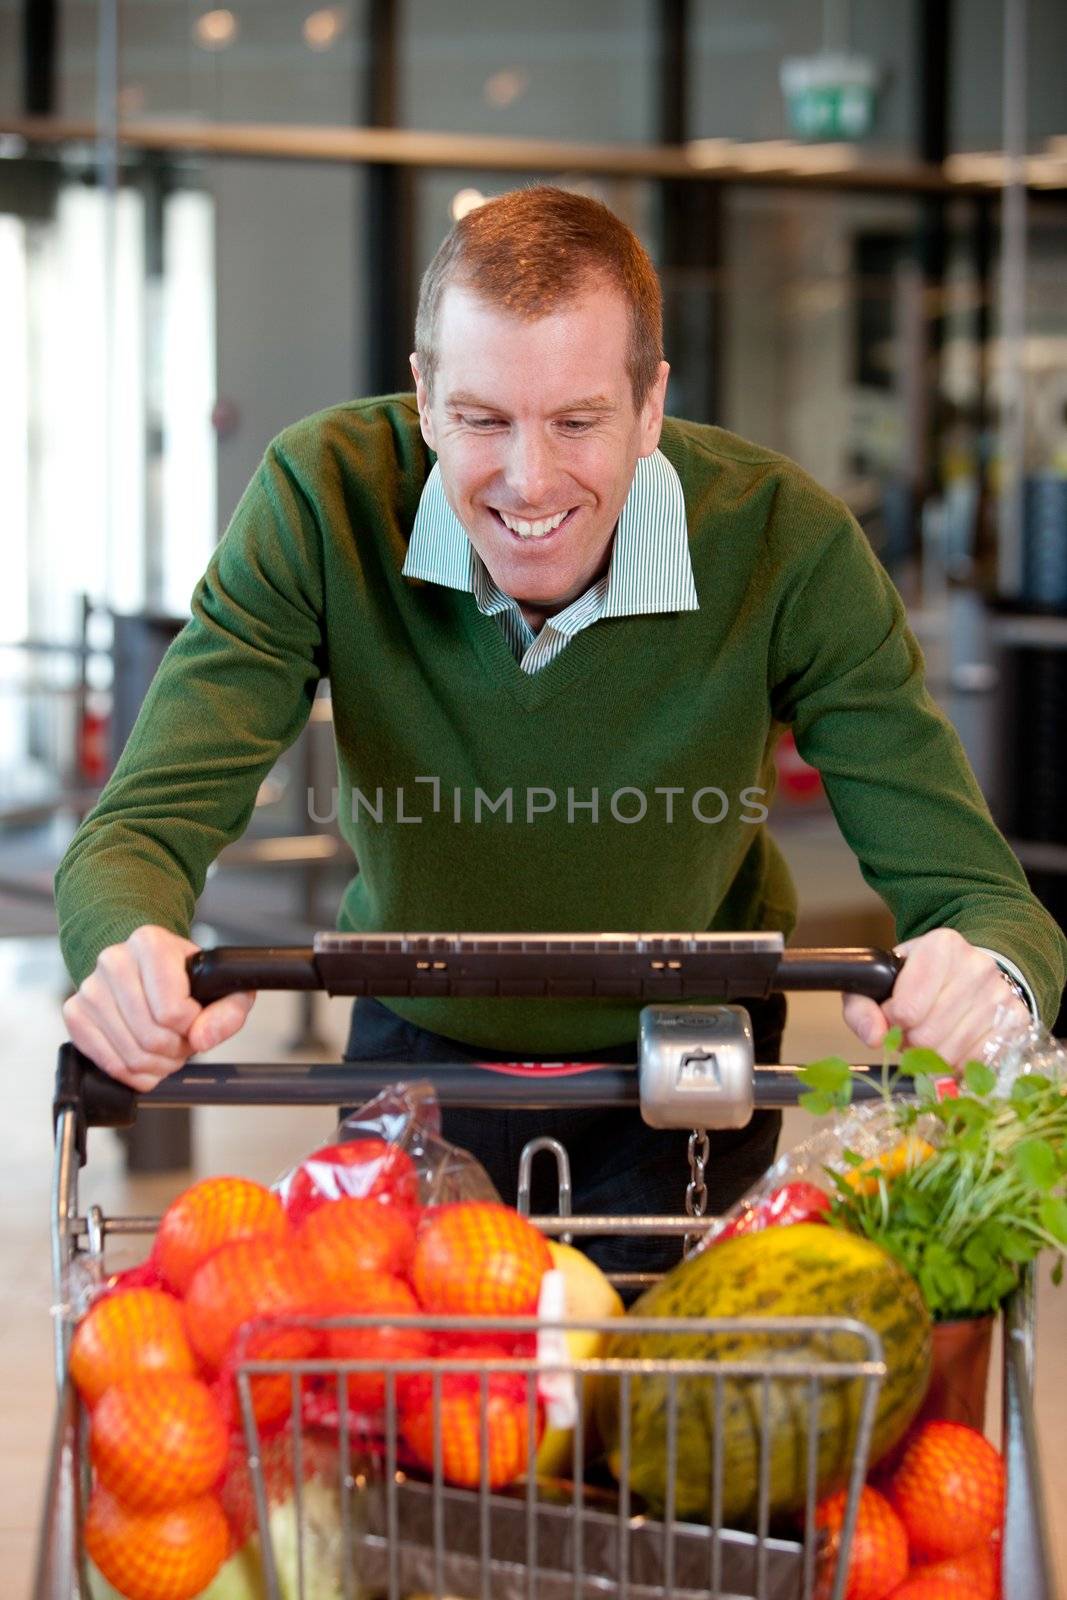 Portrait of a man pushing a grocery cart in a grocery store